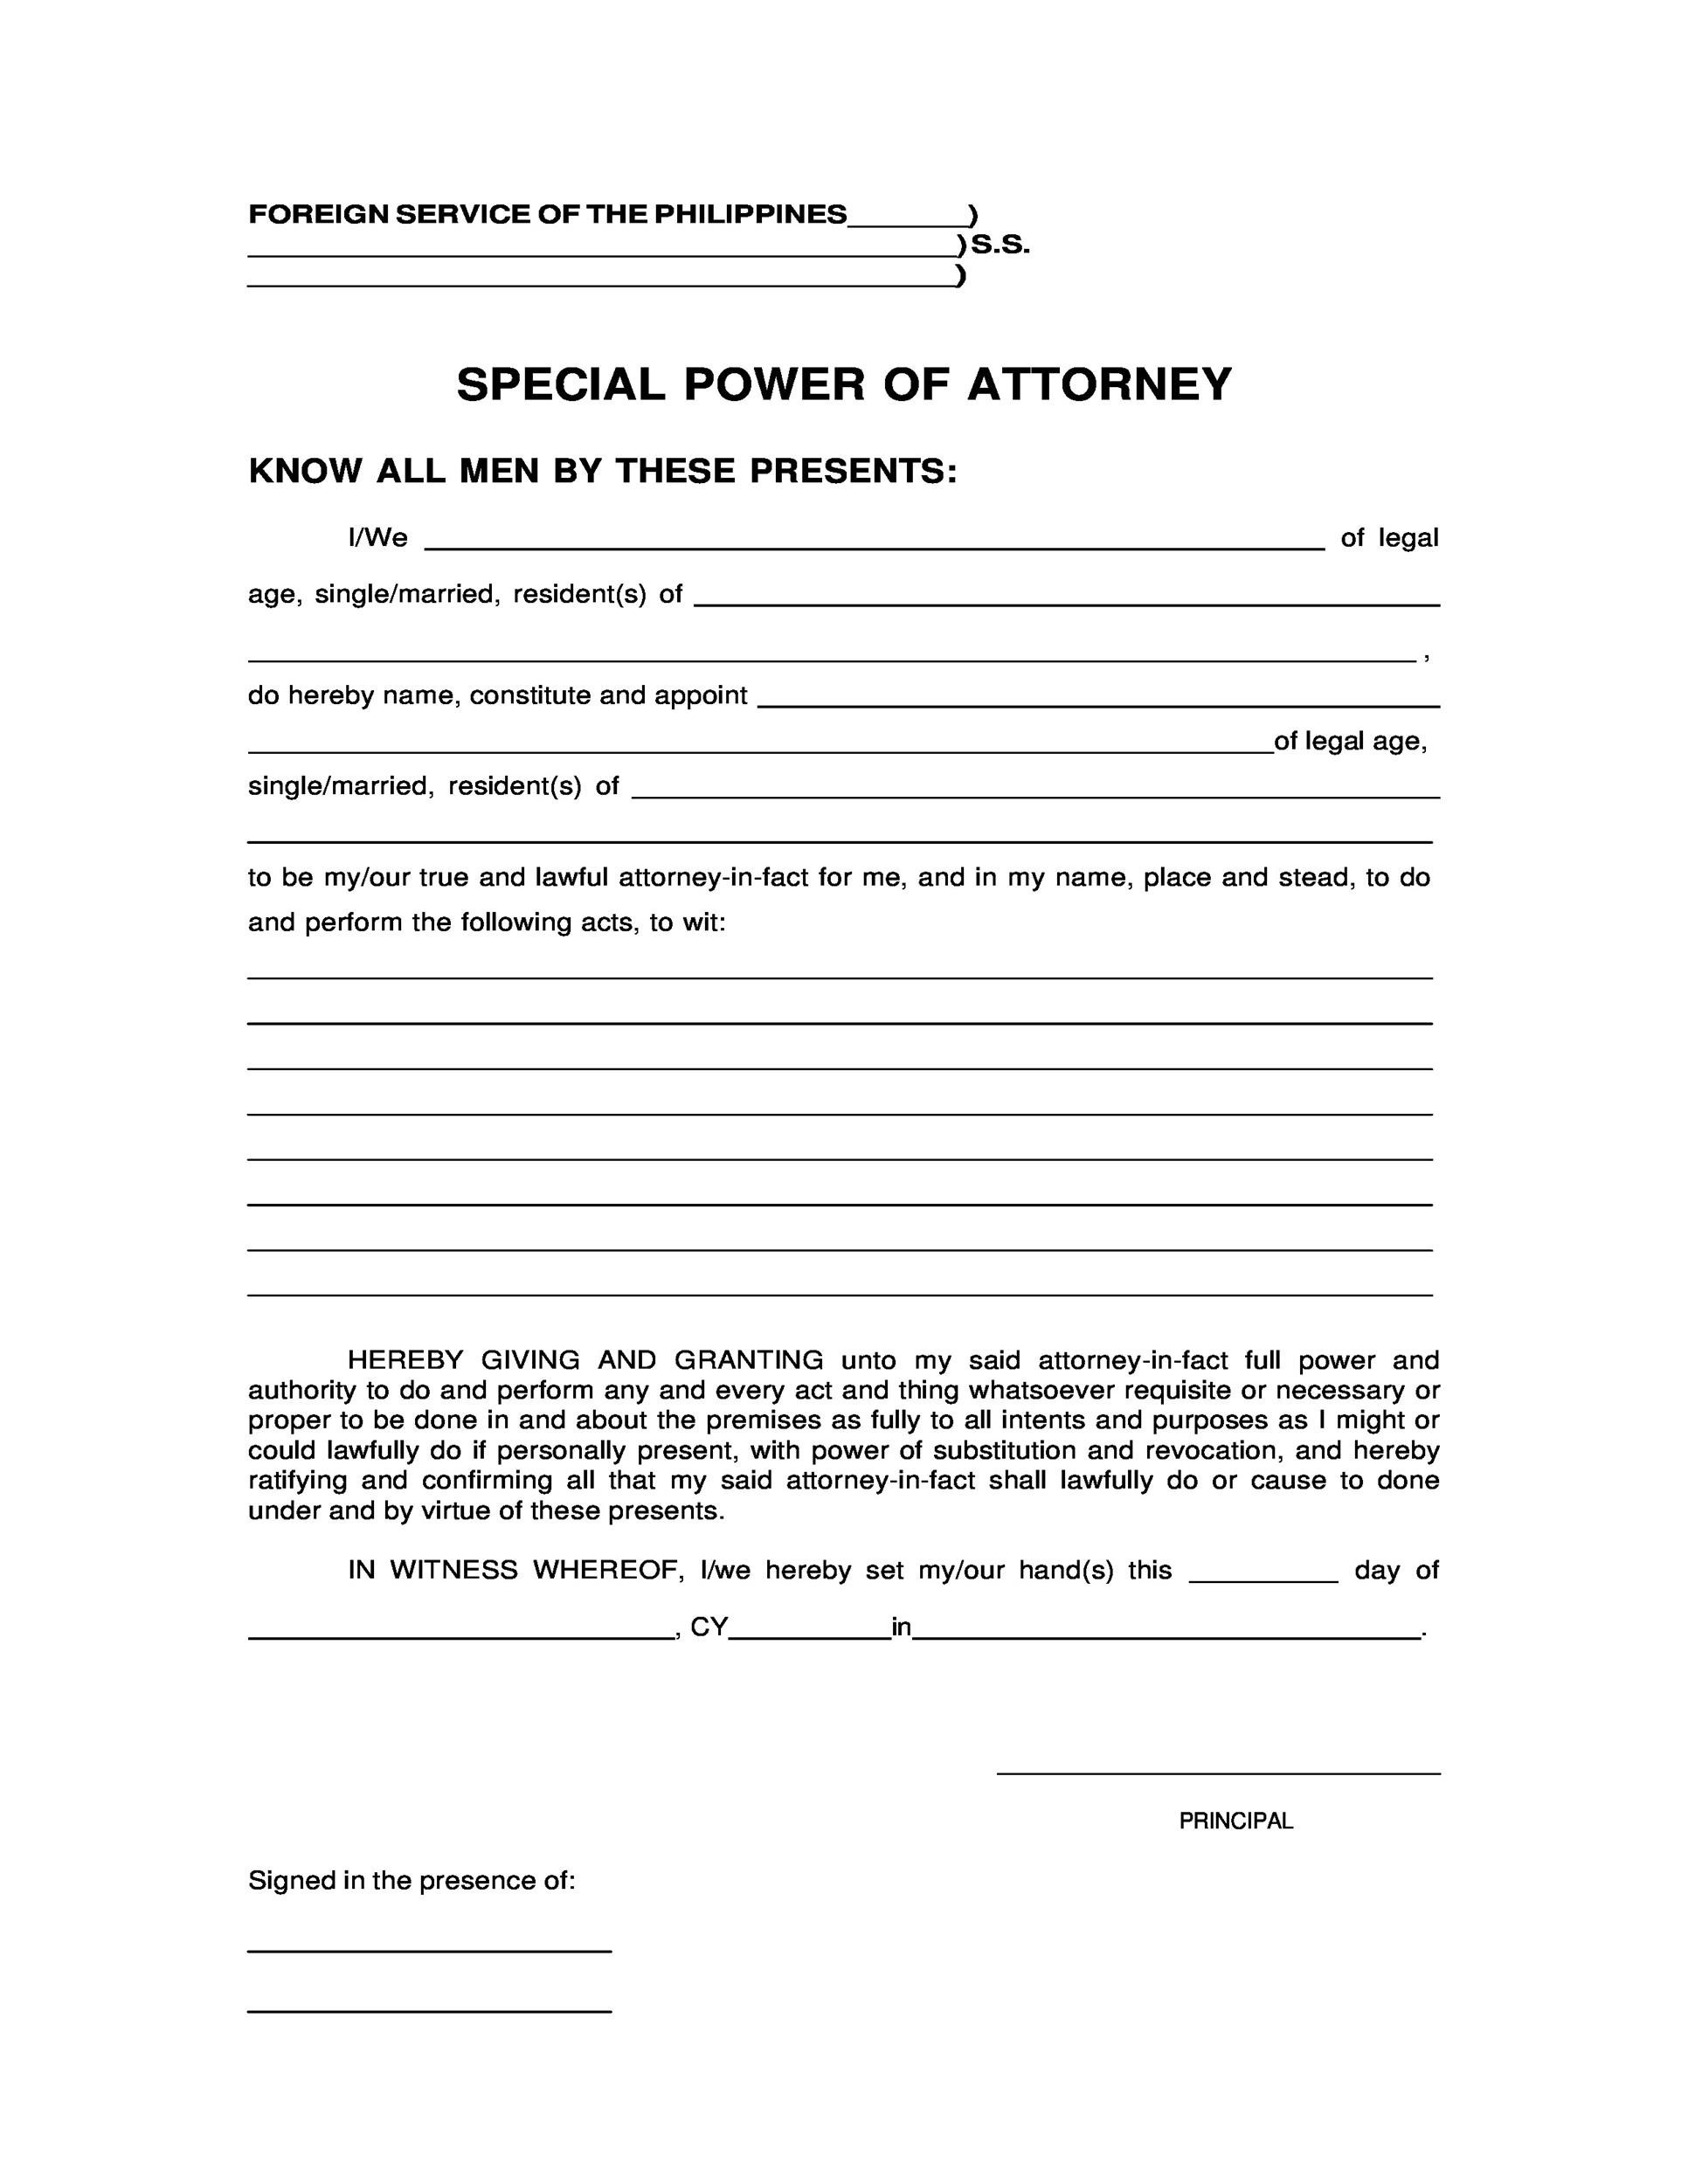 Sample special power of attorney to sell property